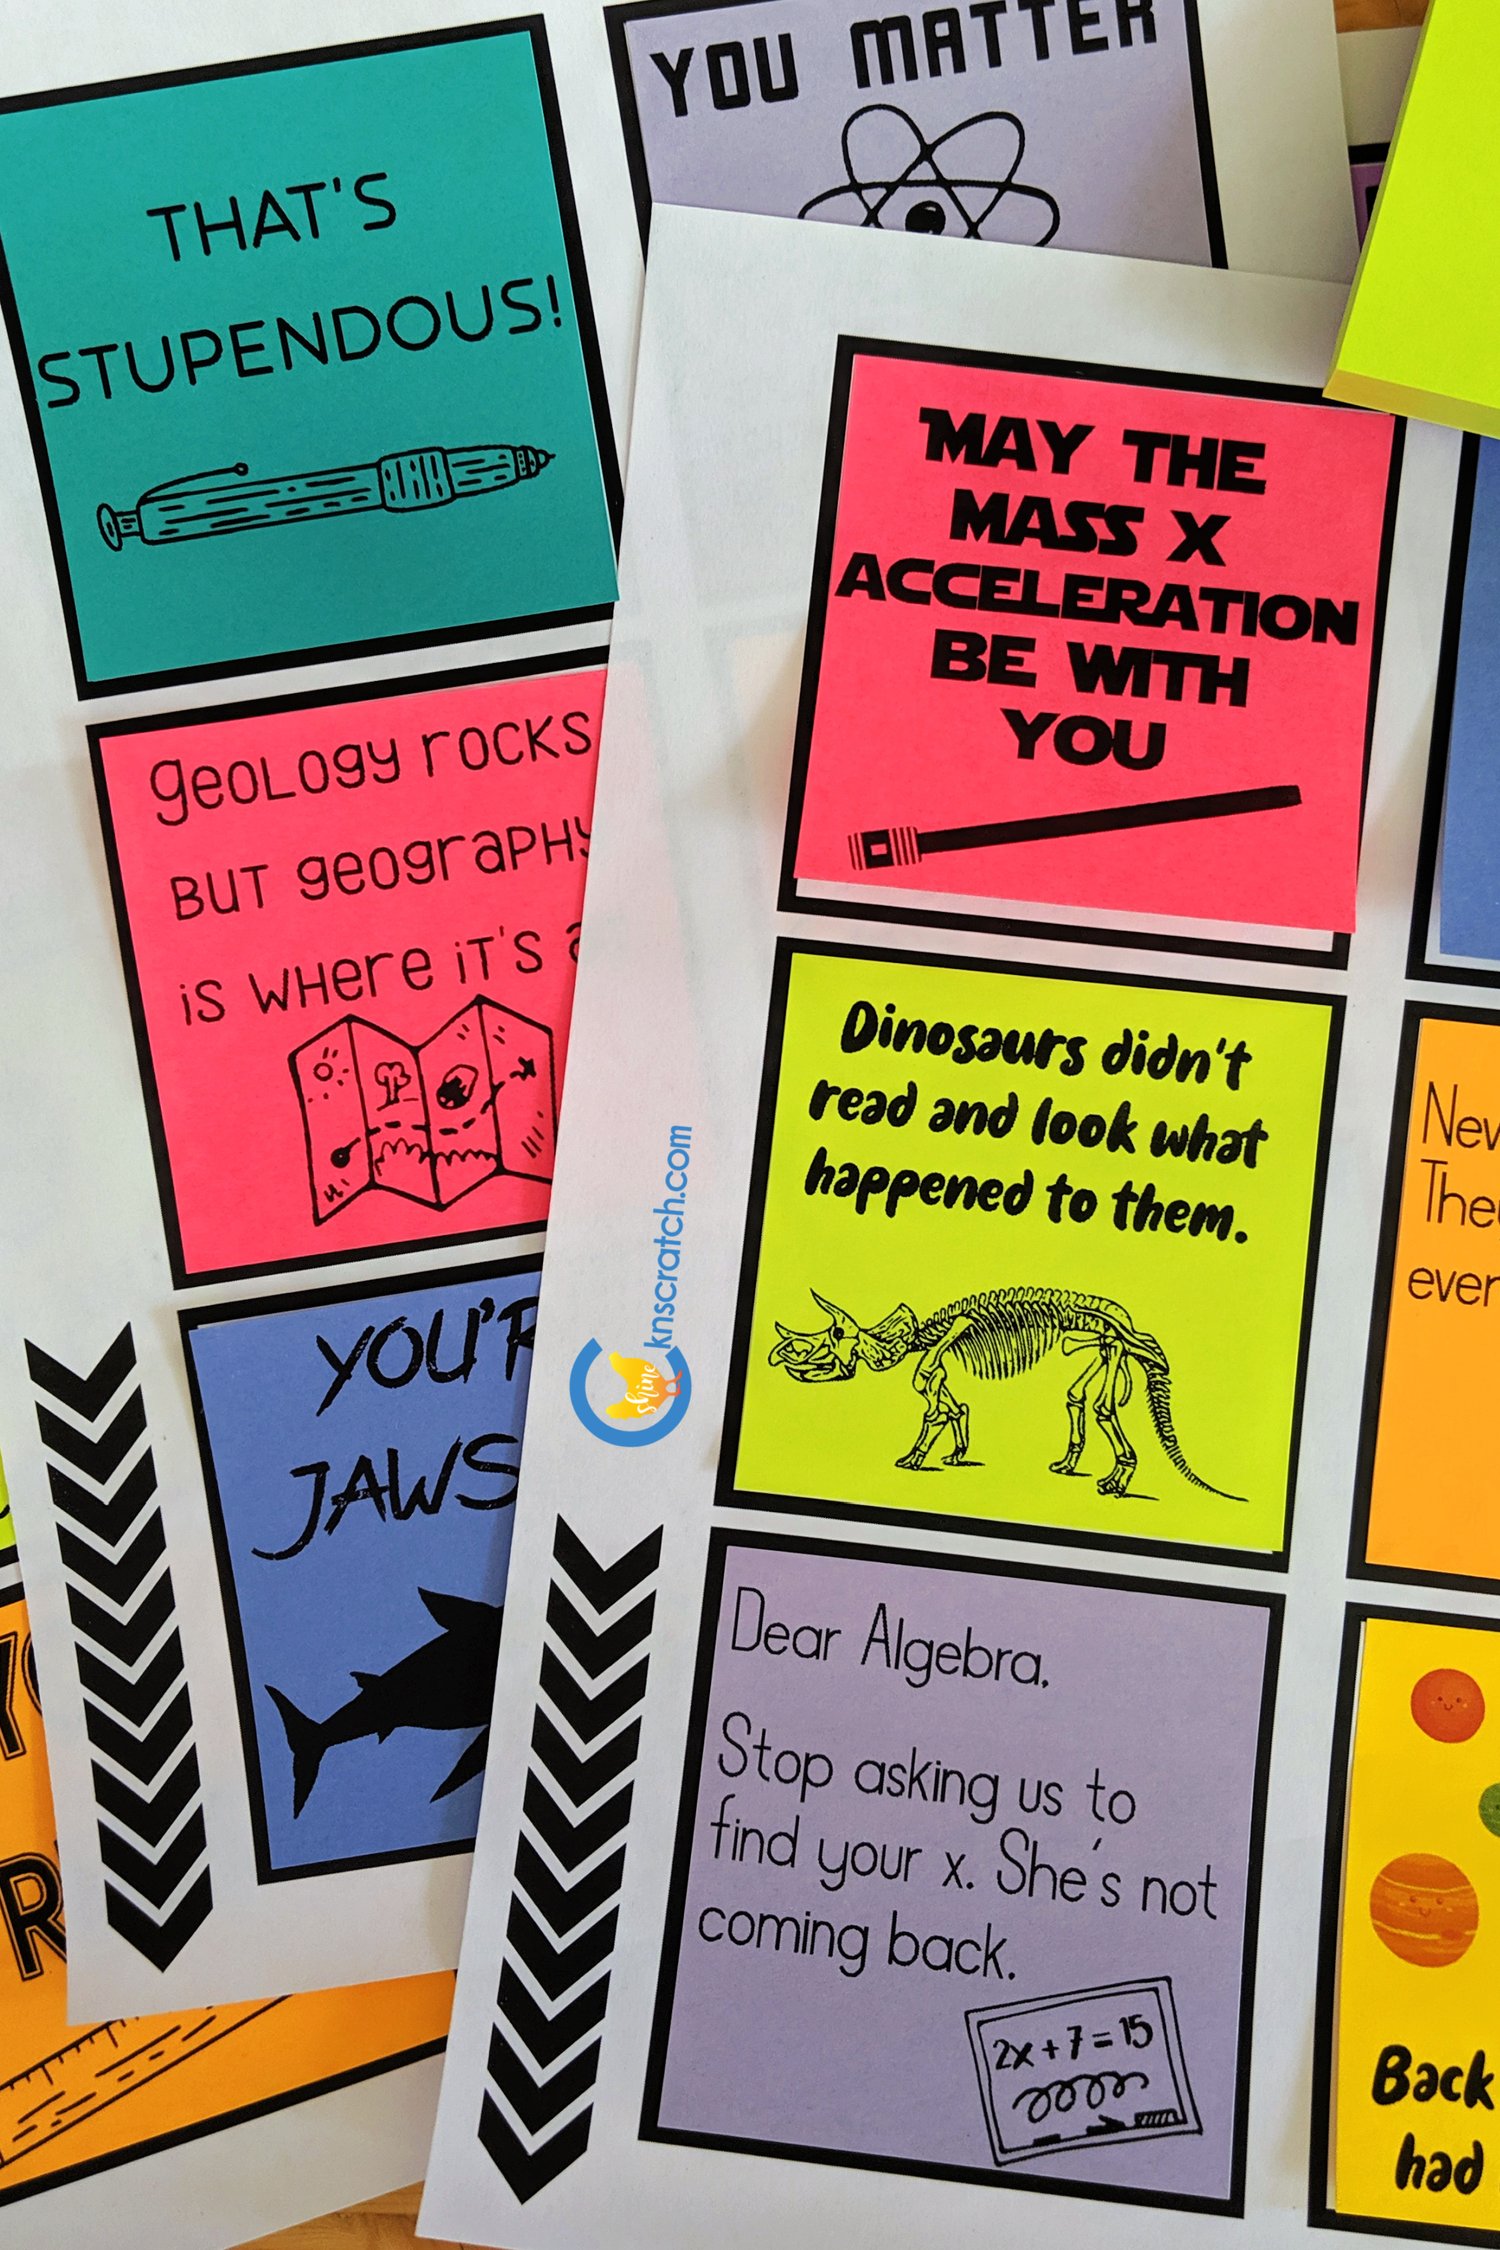 How to Print Custom Sticky Notes with a Free Template - Happy Teacher Mama